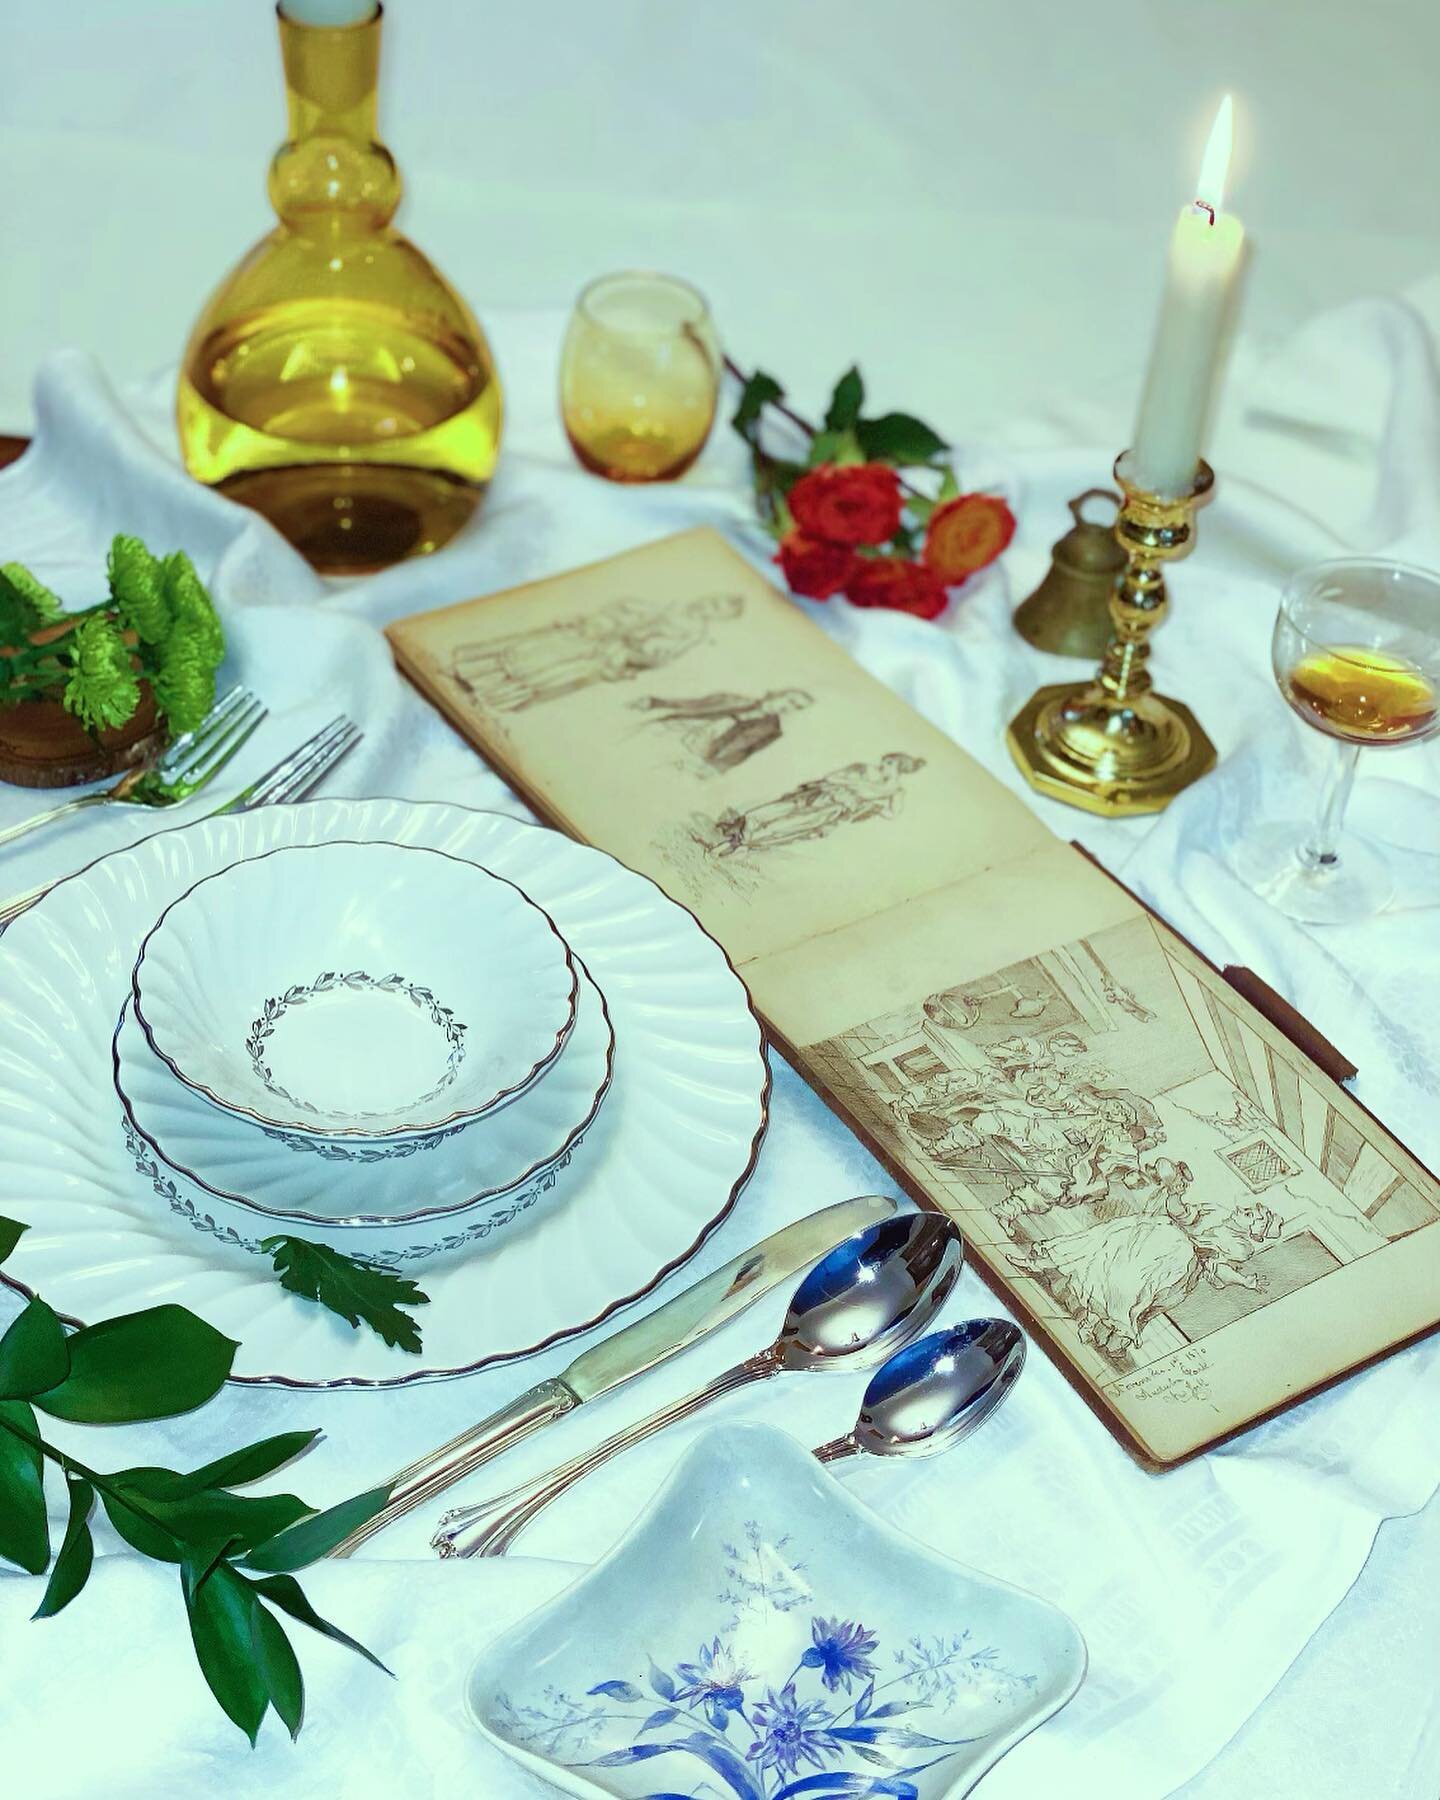 An ancestral place setting🌿 
We try to save memories of those who came before us through the little things they&rsquo;ve left behind. And much of the time they end up in our daily lives either as an old photograph hung on the wall, or a set of china